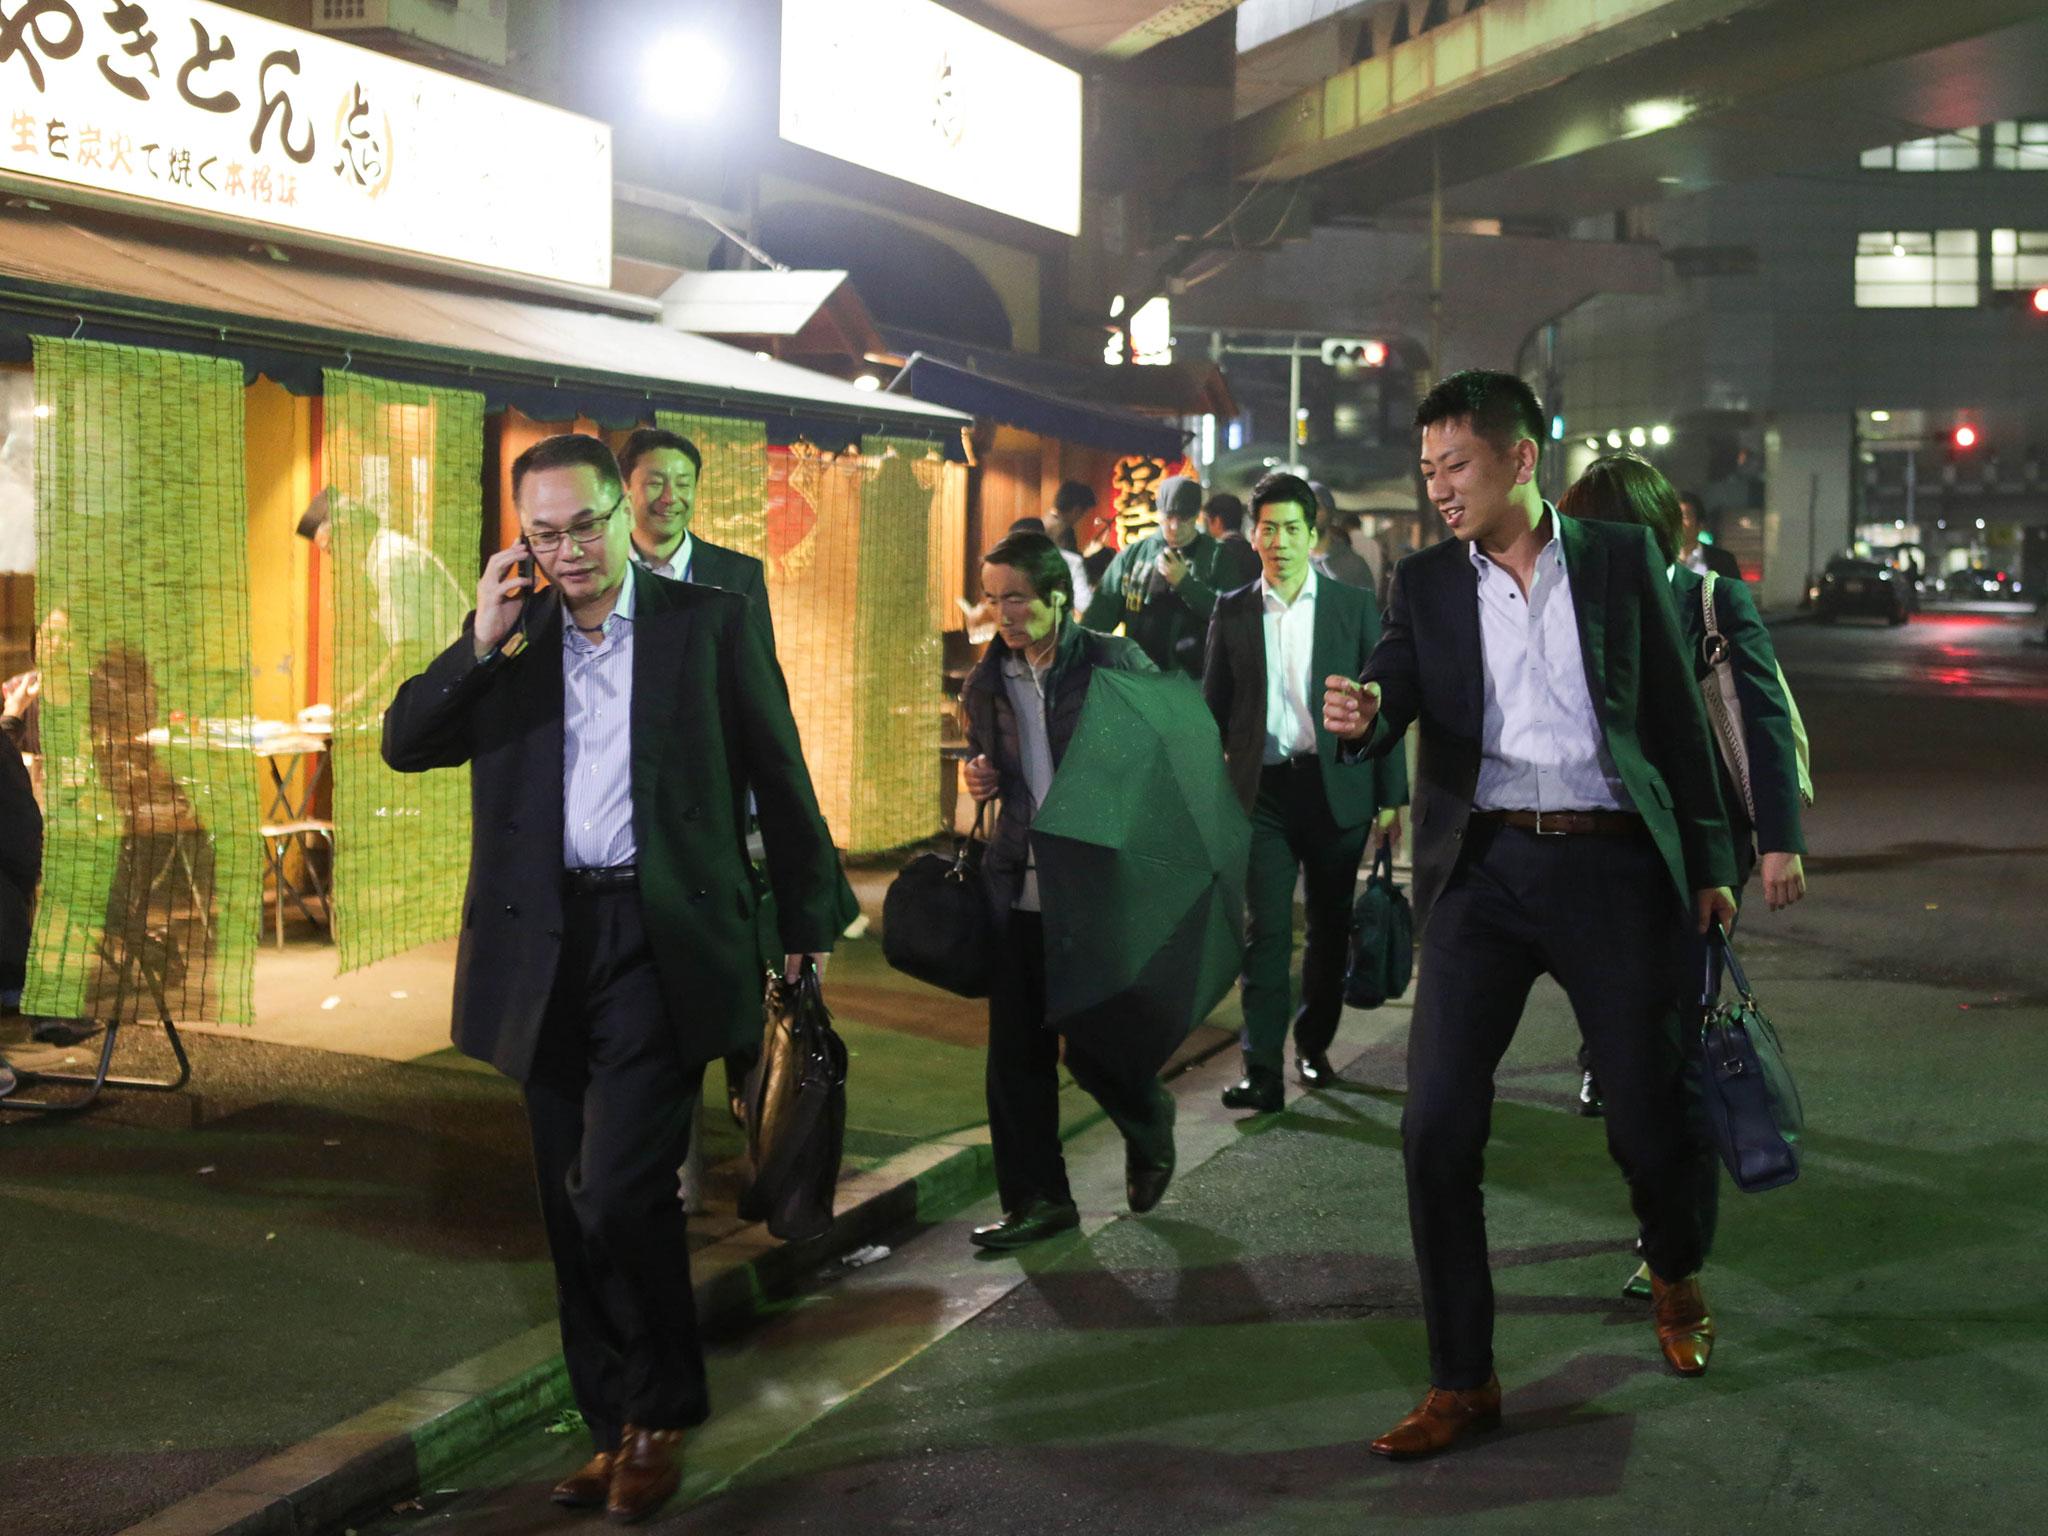 Salary men enjoy drinking and walking on bar street after five in Tokyo